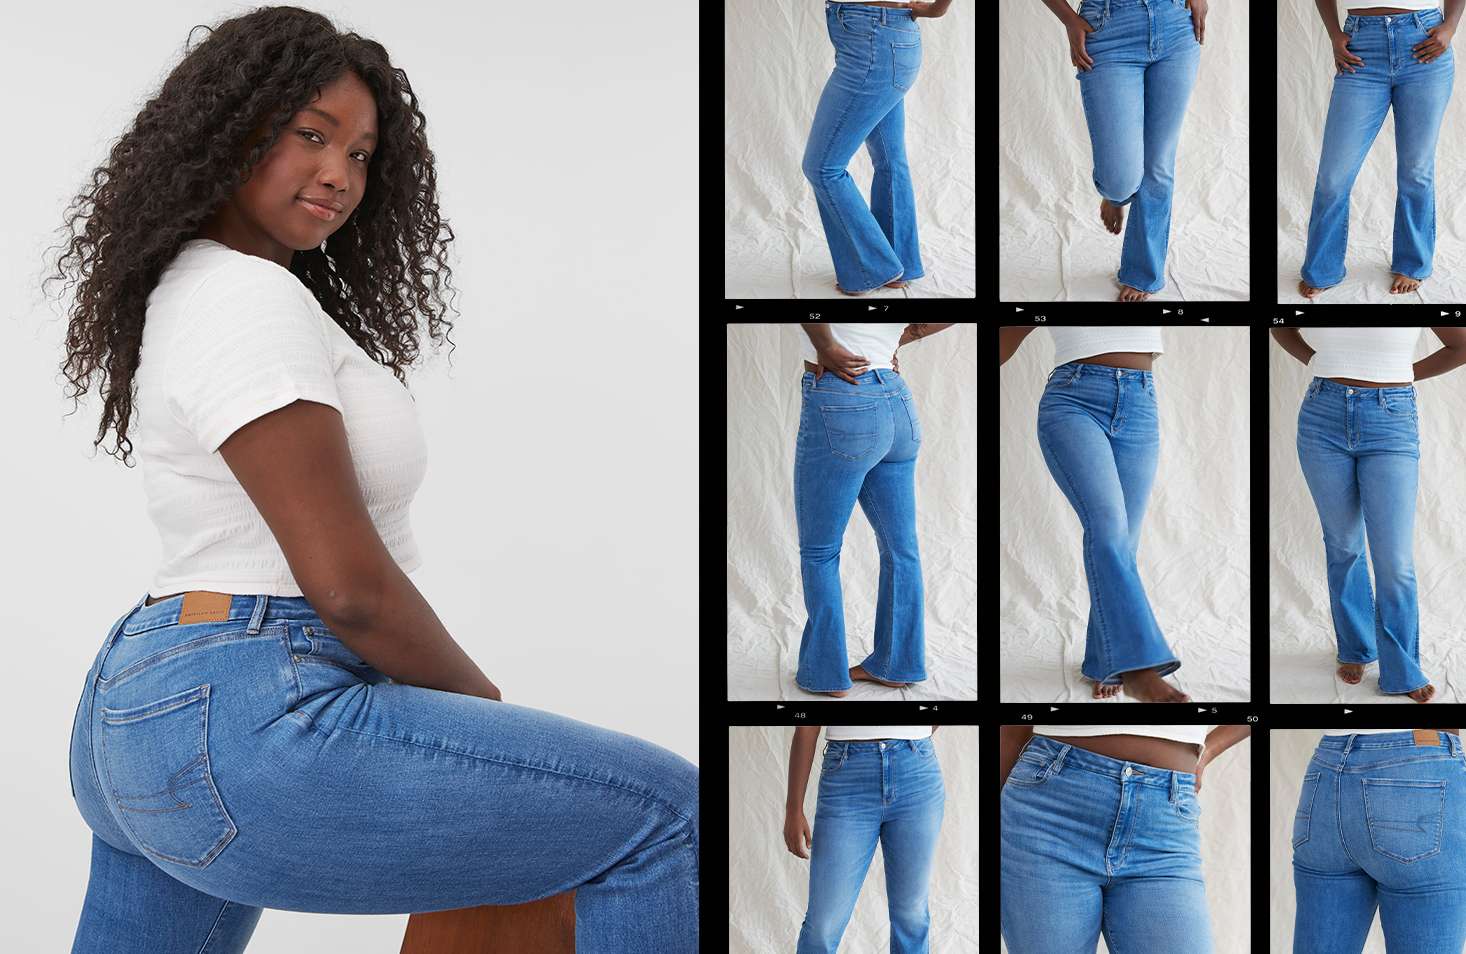 Tatiana is 5'9" and wearing the Curvy '90s Bootcut Jean in a size 12 Long.